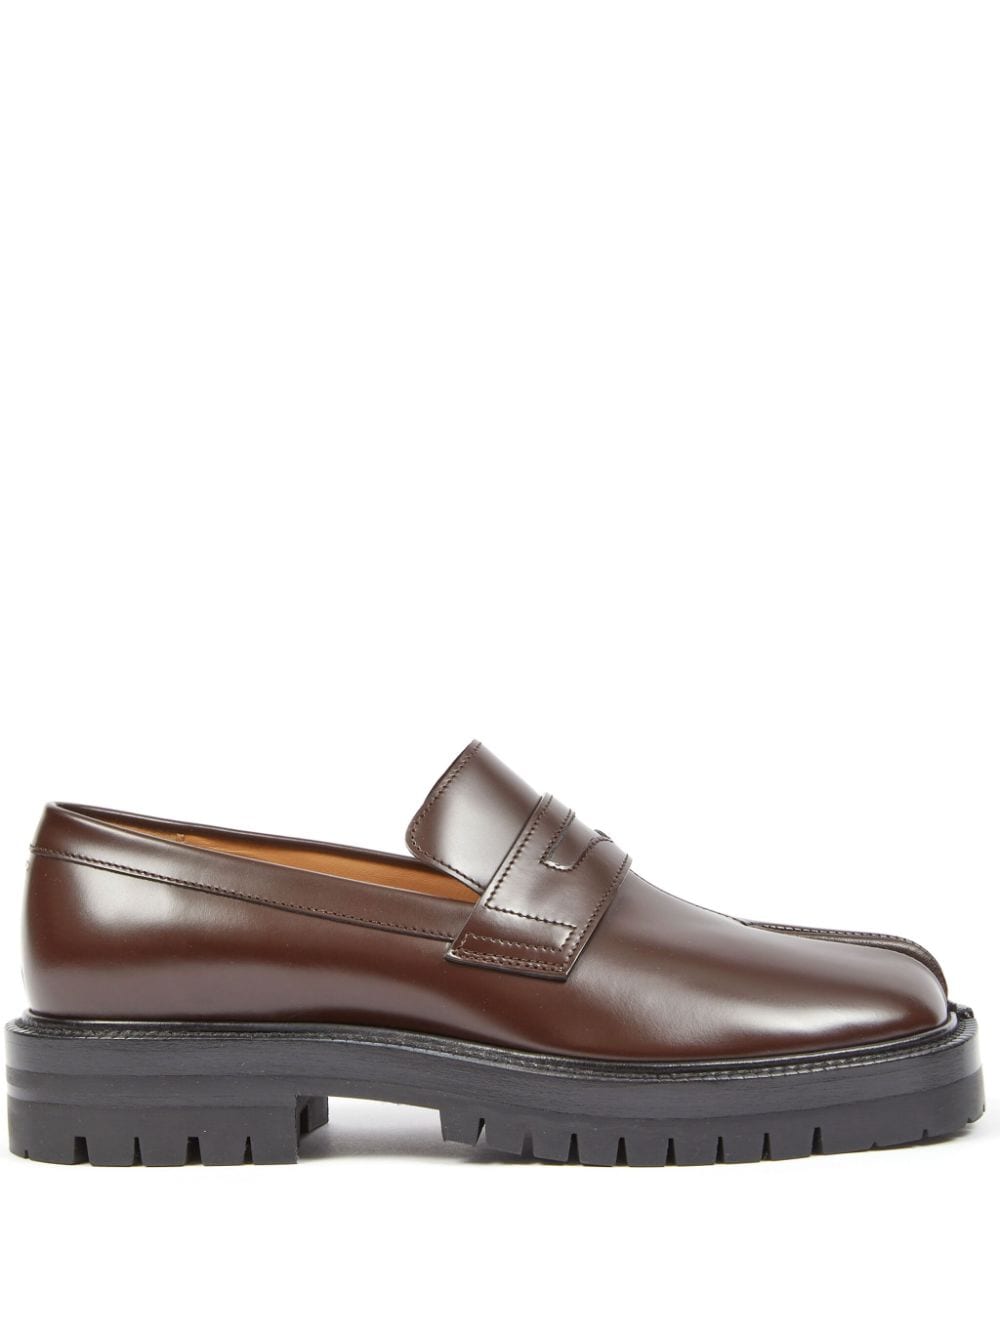 Maison Margiela Tabi Leather Loafers In Brown